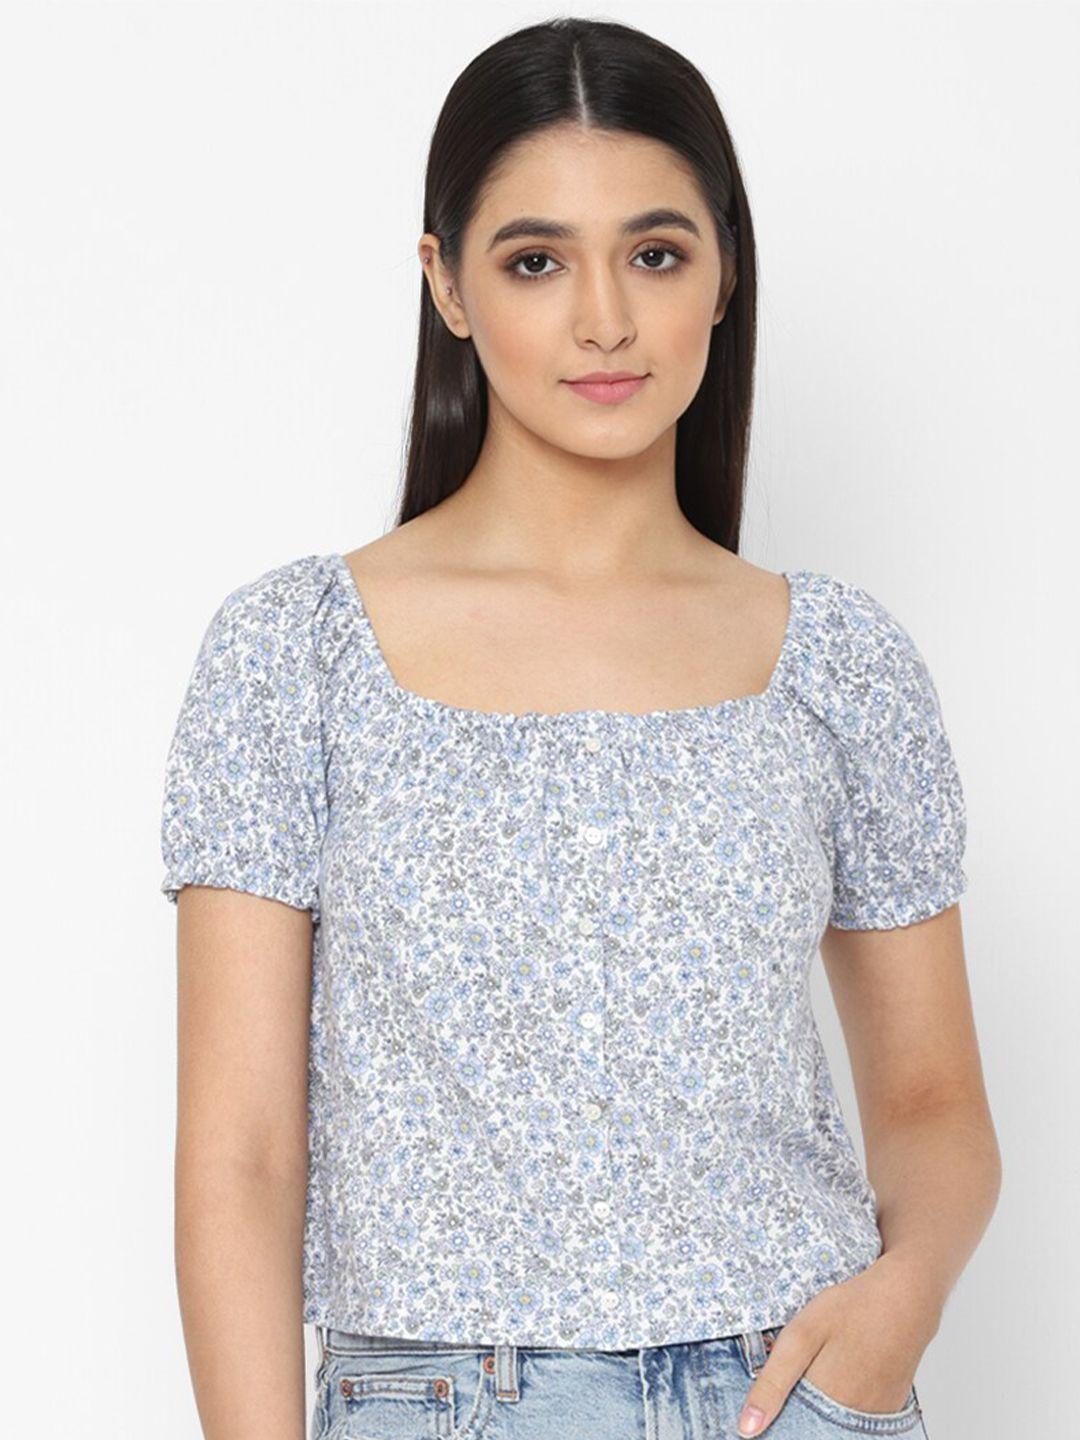 american eagle outfitters blue floral printed top